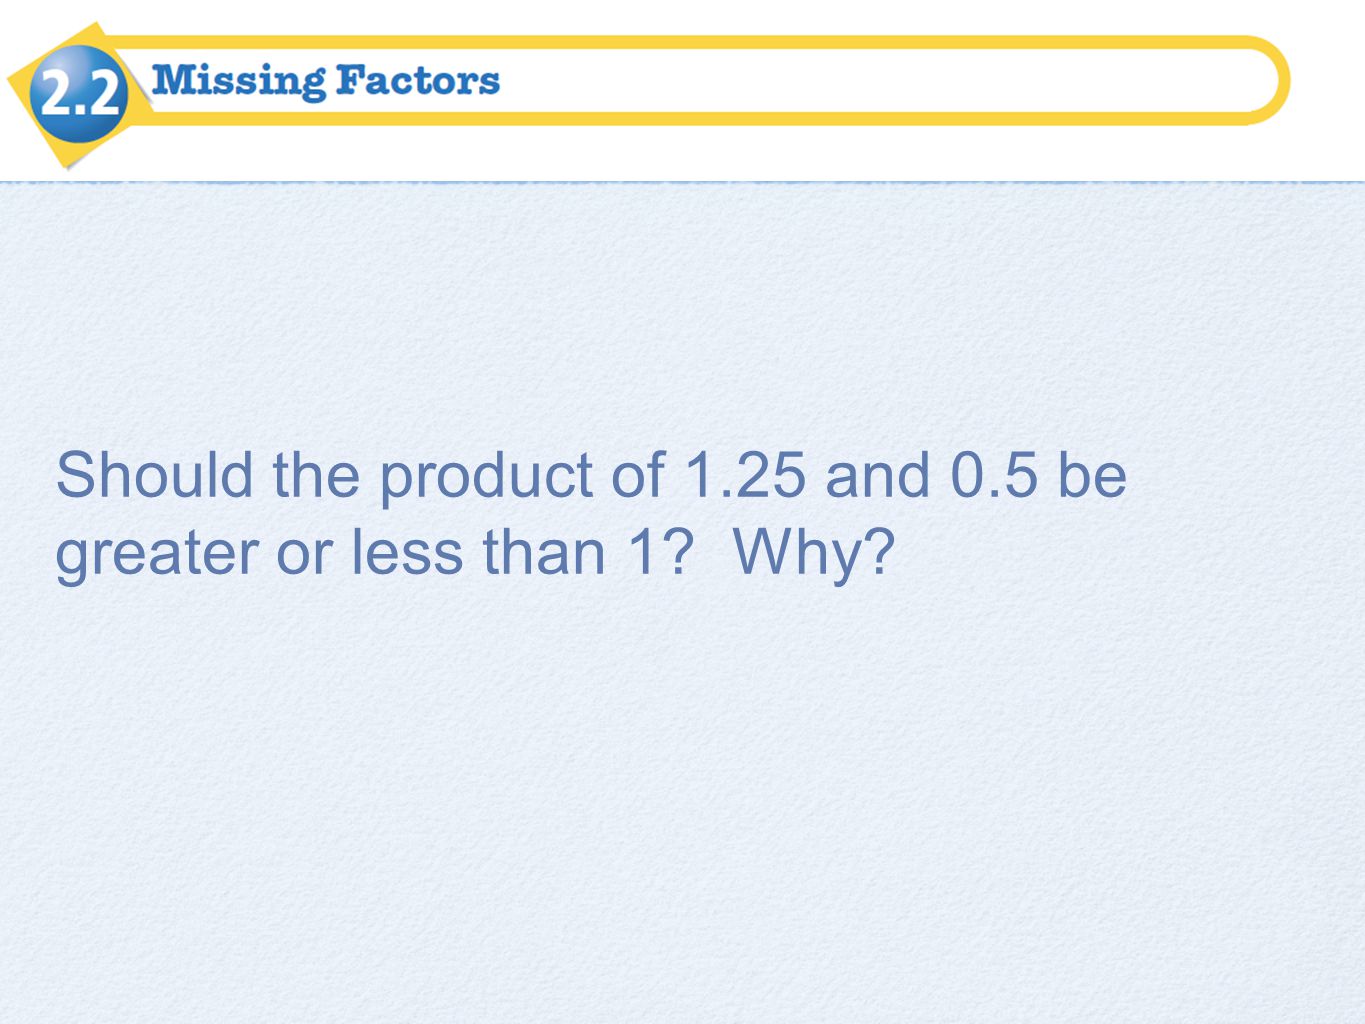 Should the product of 1.25 and 0.5 be greater or less than 1 Why